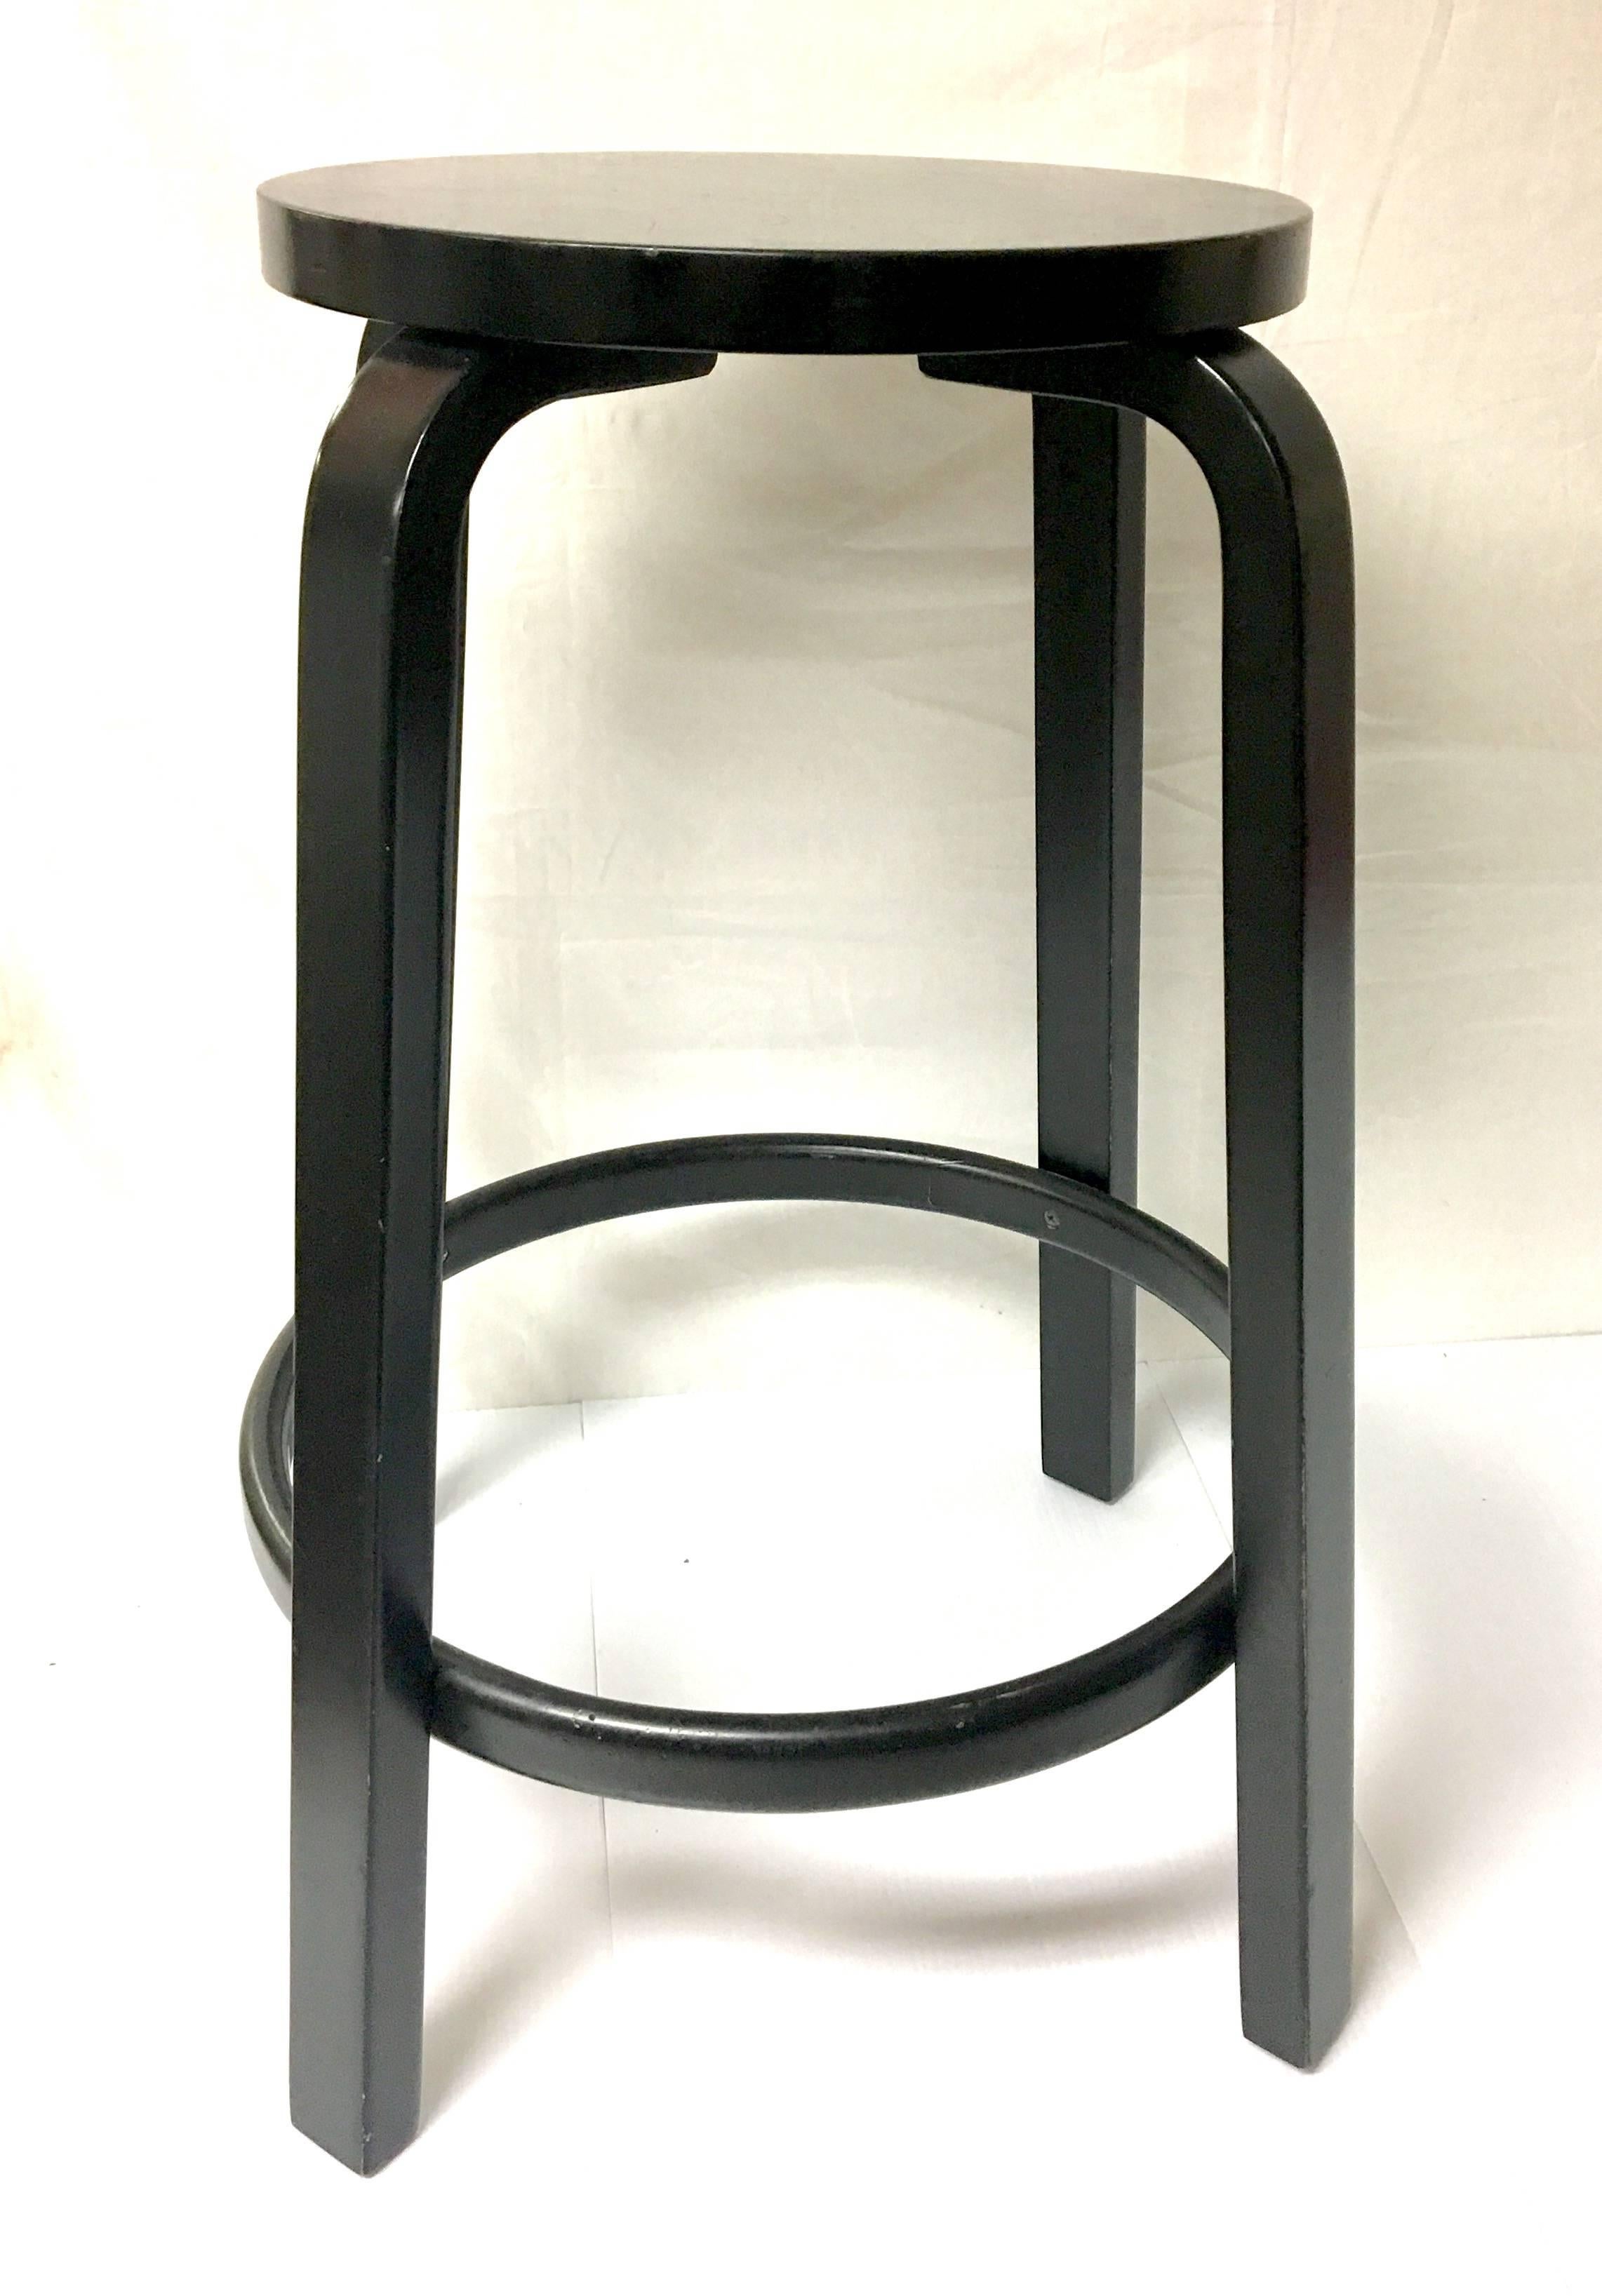 Pair of  counter stools designed by Alvar Aalto for Artek, solid and sturdy frames with original worn finish , shows wear and chips sold AS/IS, each stool comes with its original rubber feet. Buyer can buy 1 or 2